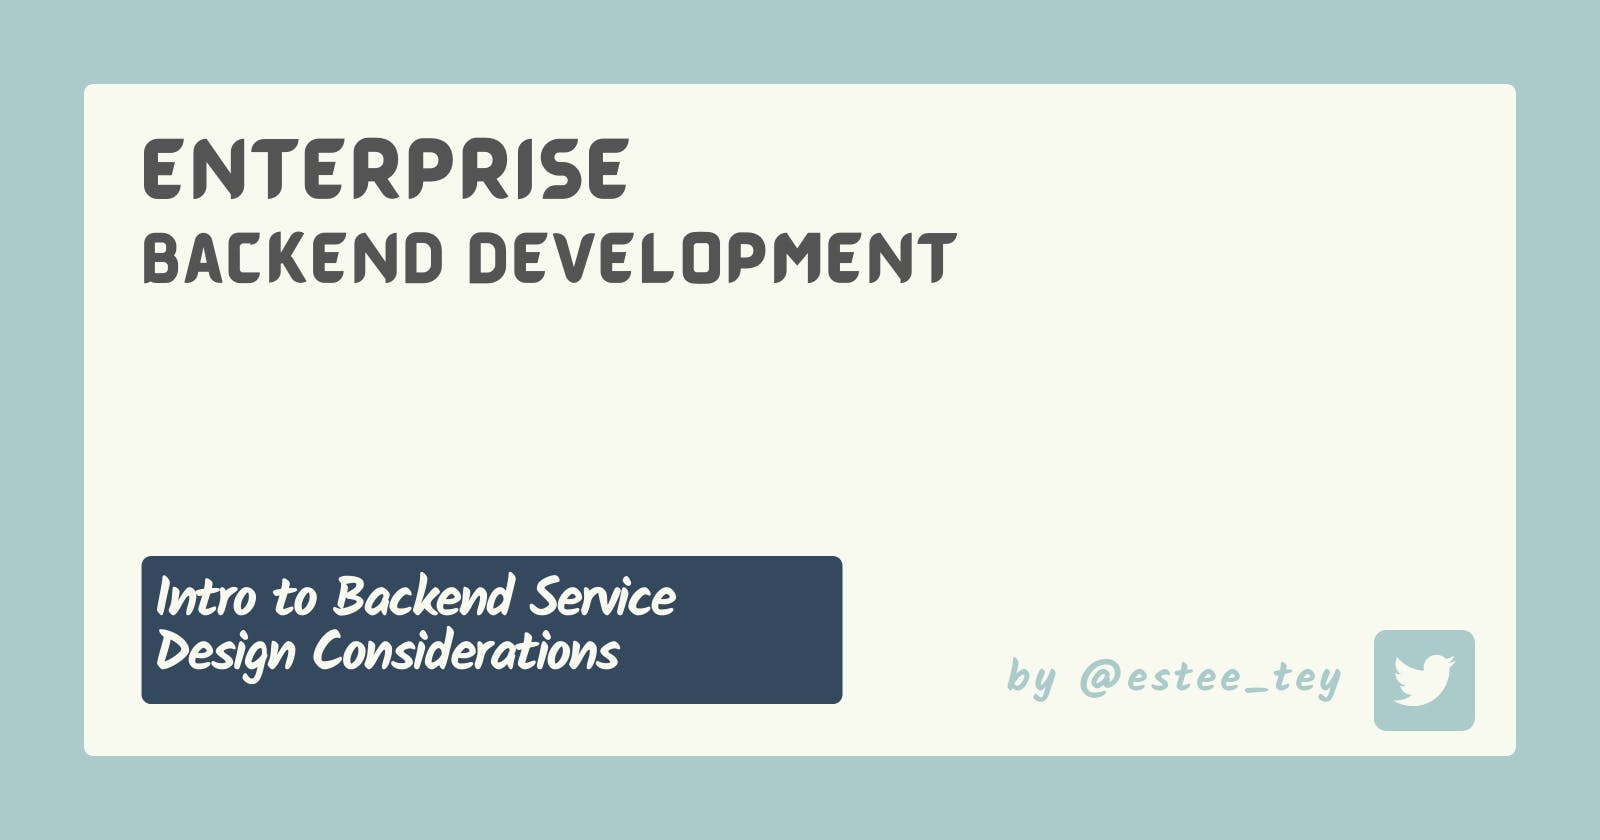 Introduction to Enterprise Backend Development: Service Design Considerations